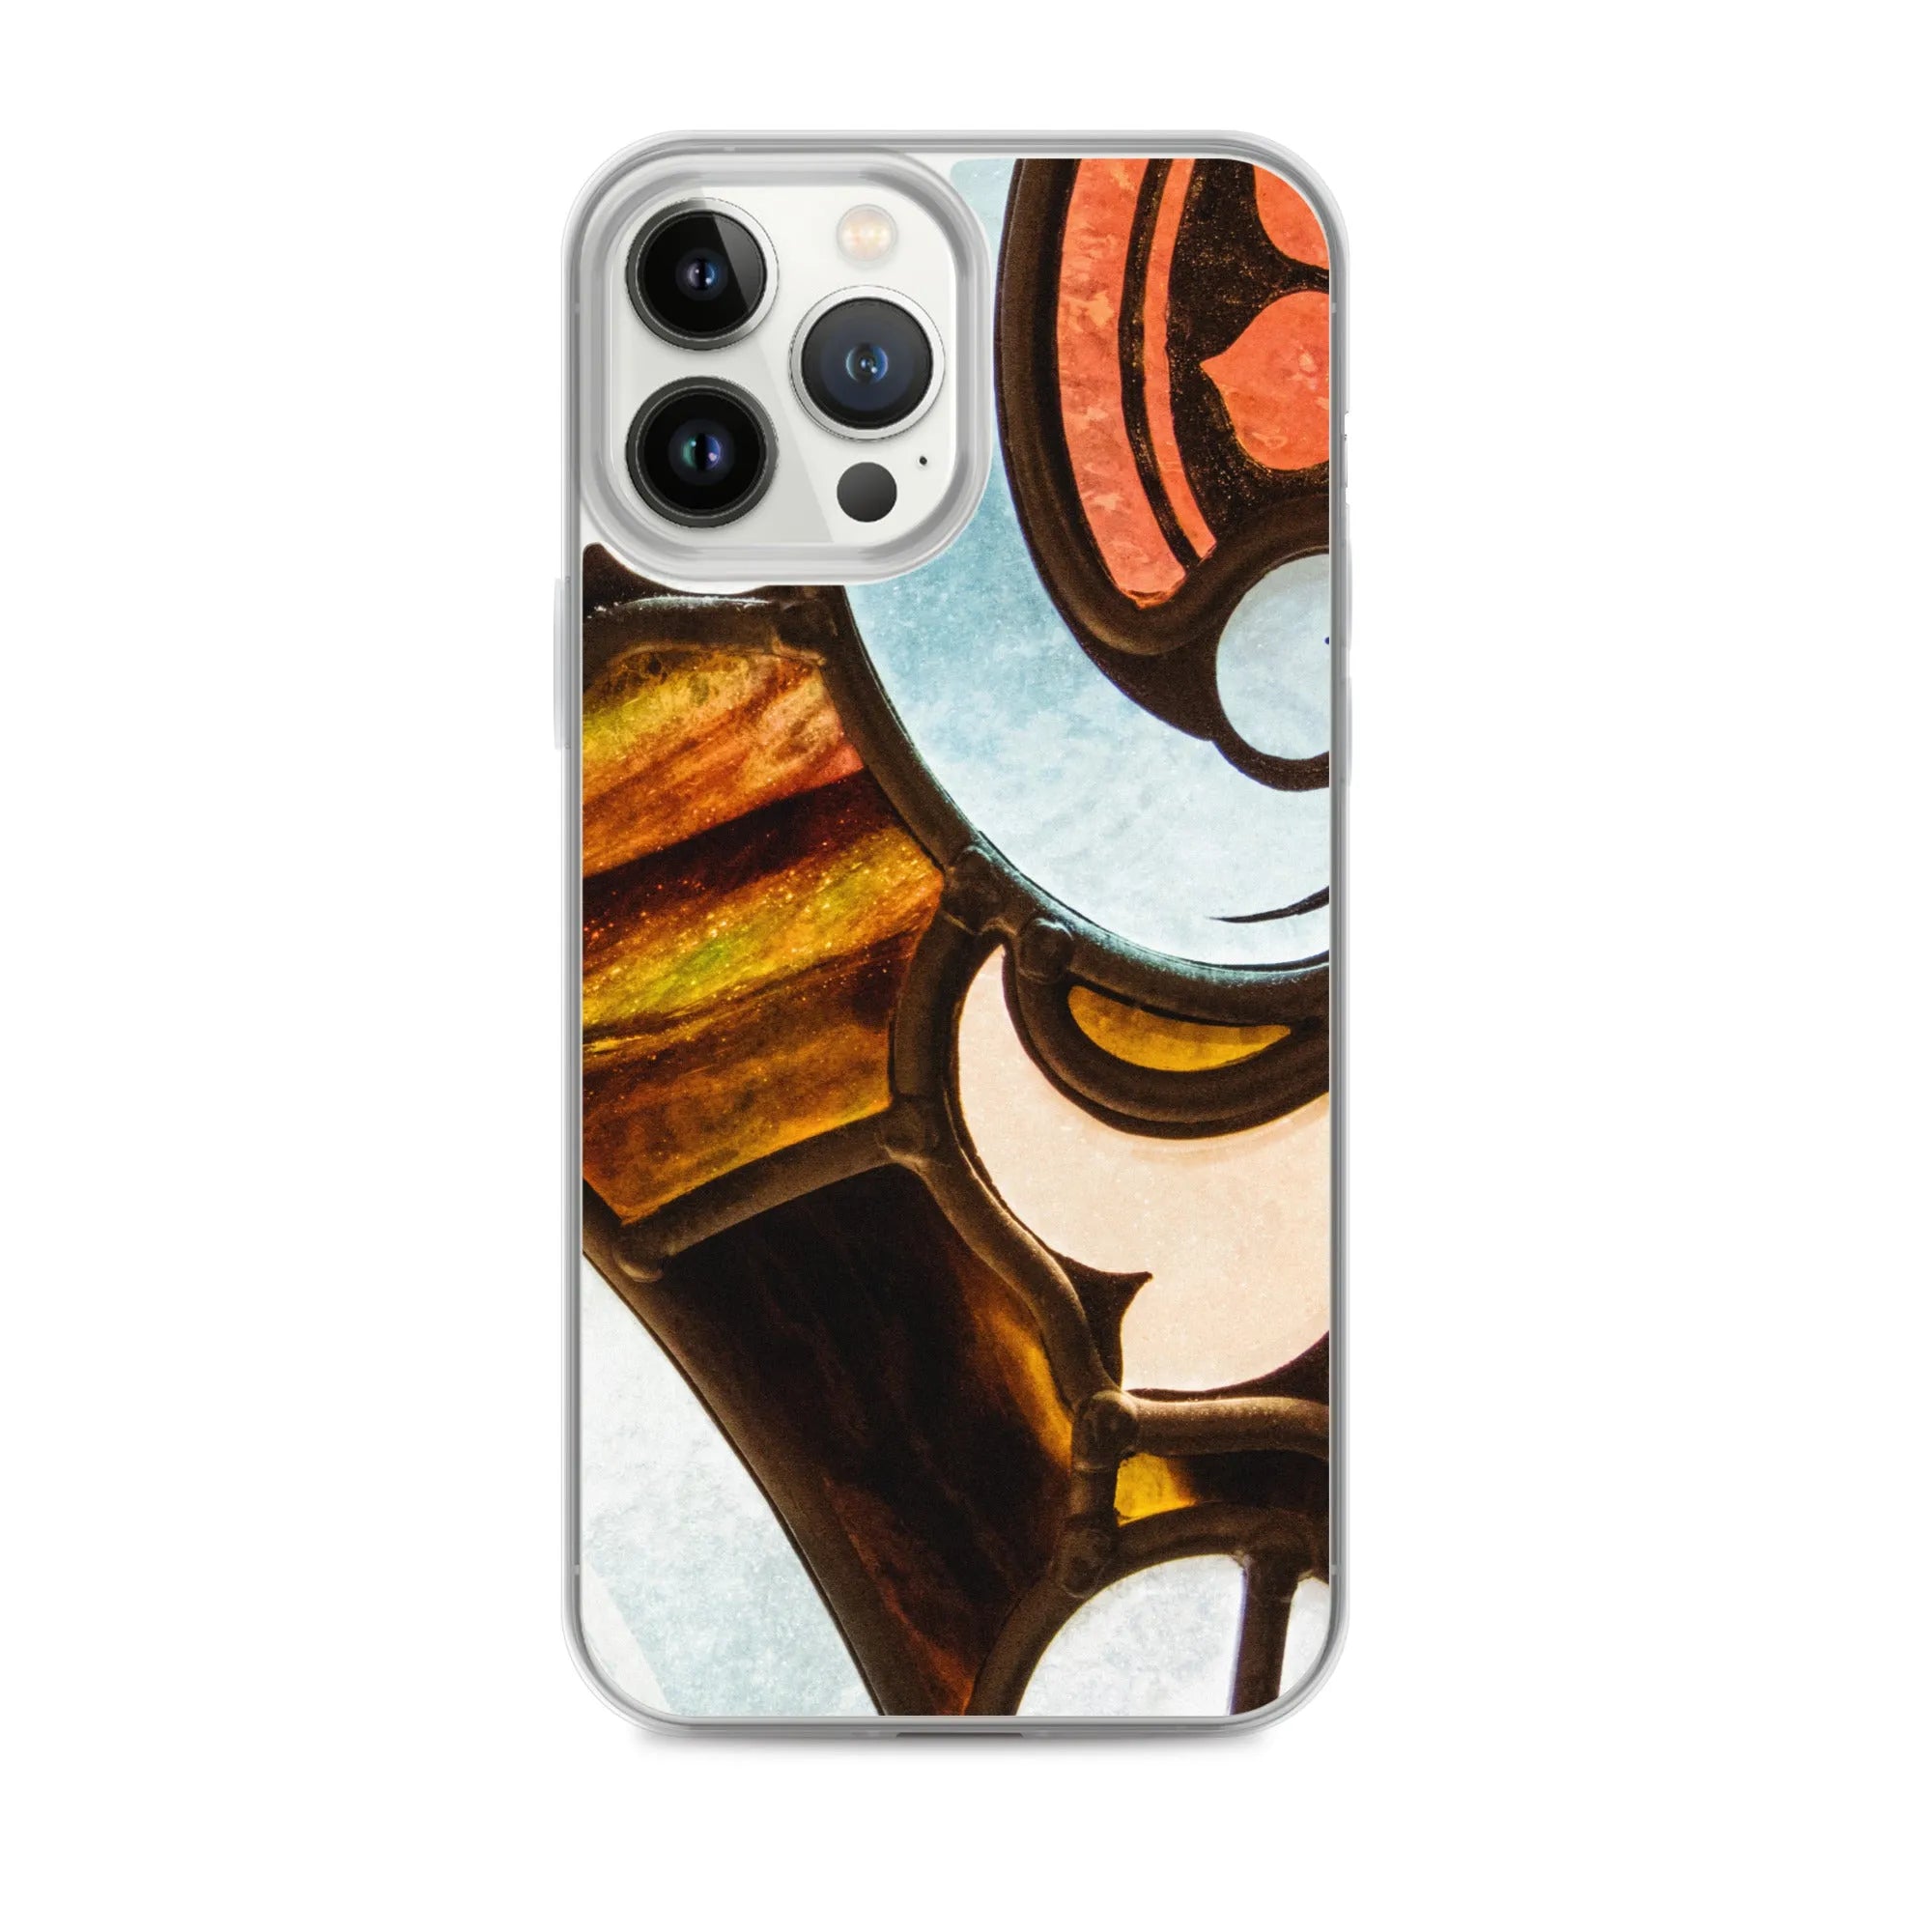 Stay Glassy - Designer Travels Art Iphone Case - Iphone 13 Pro Max - Mobile Phone Cases - Aesthetic Art